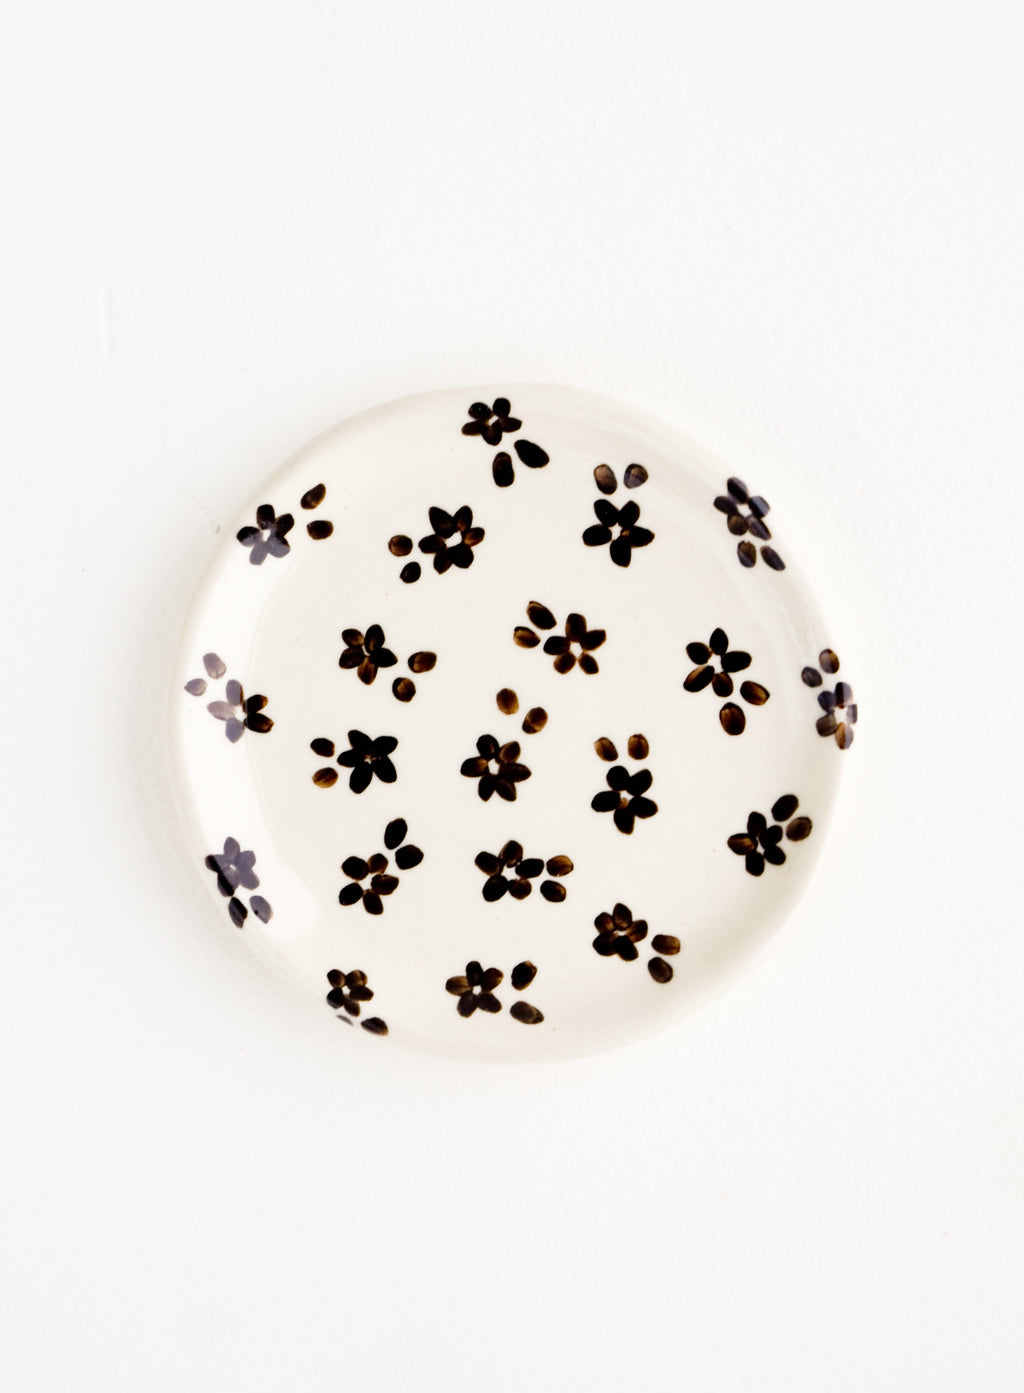 Black & White Floral: Small, round ceramic dish in white with black floral print